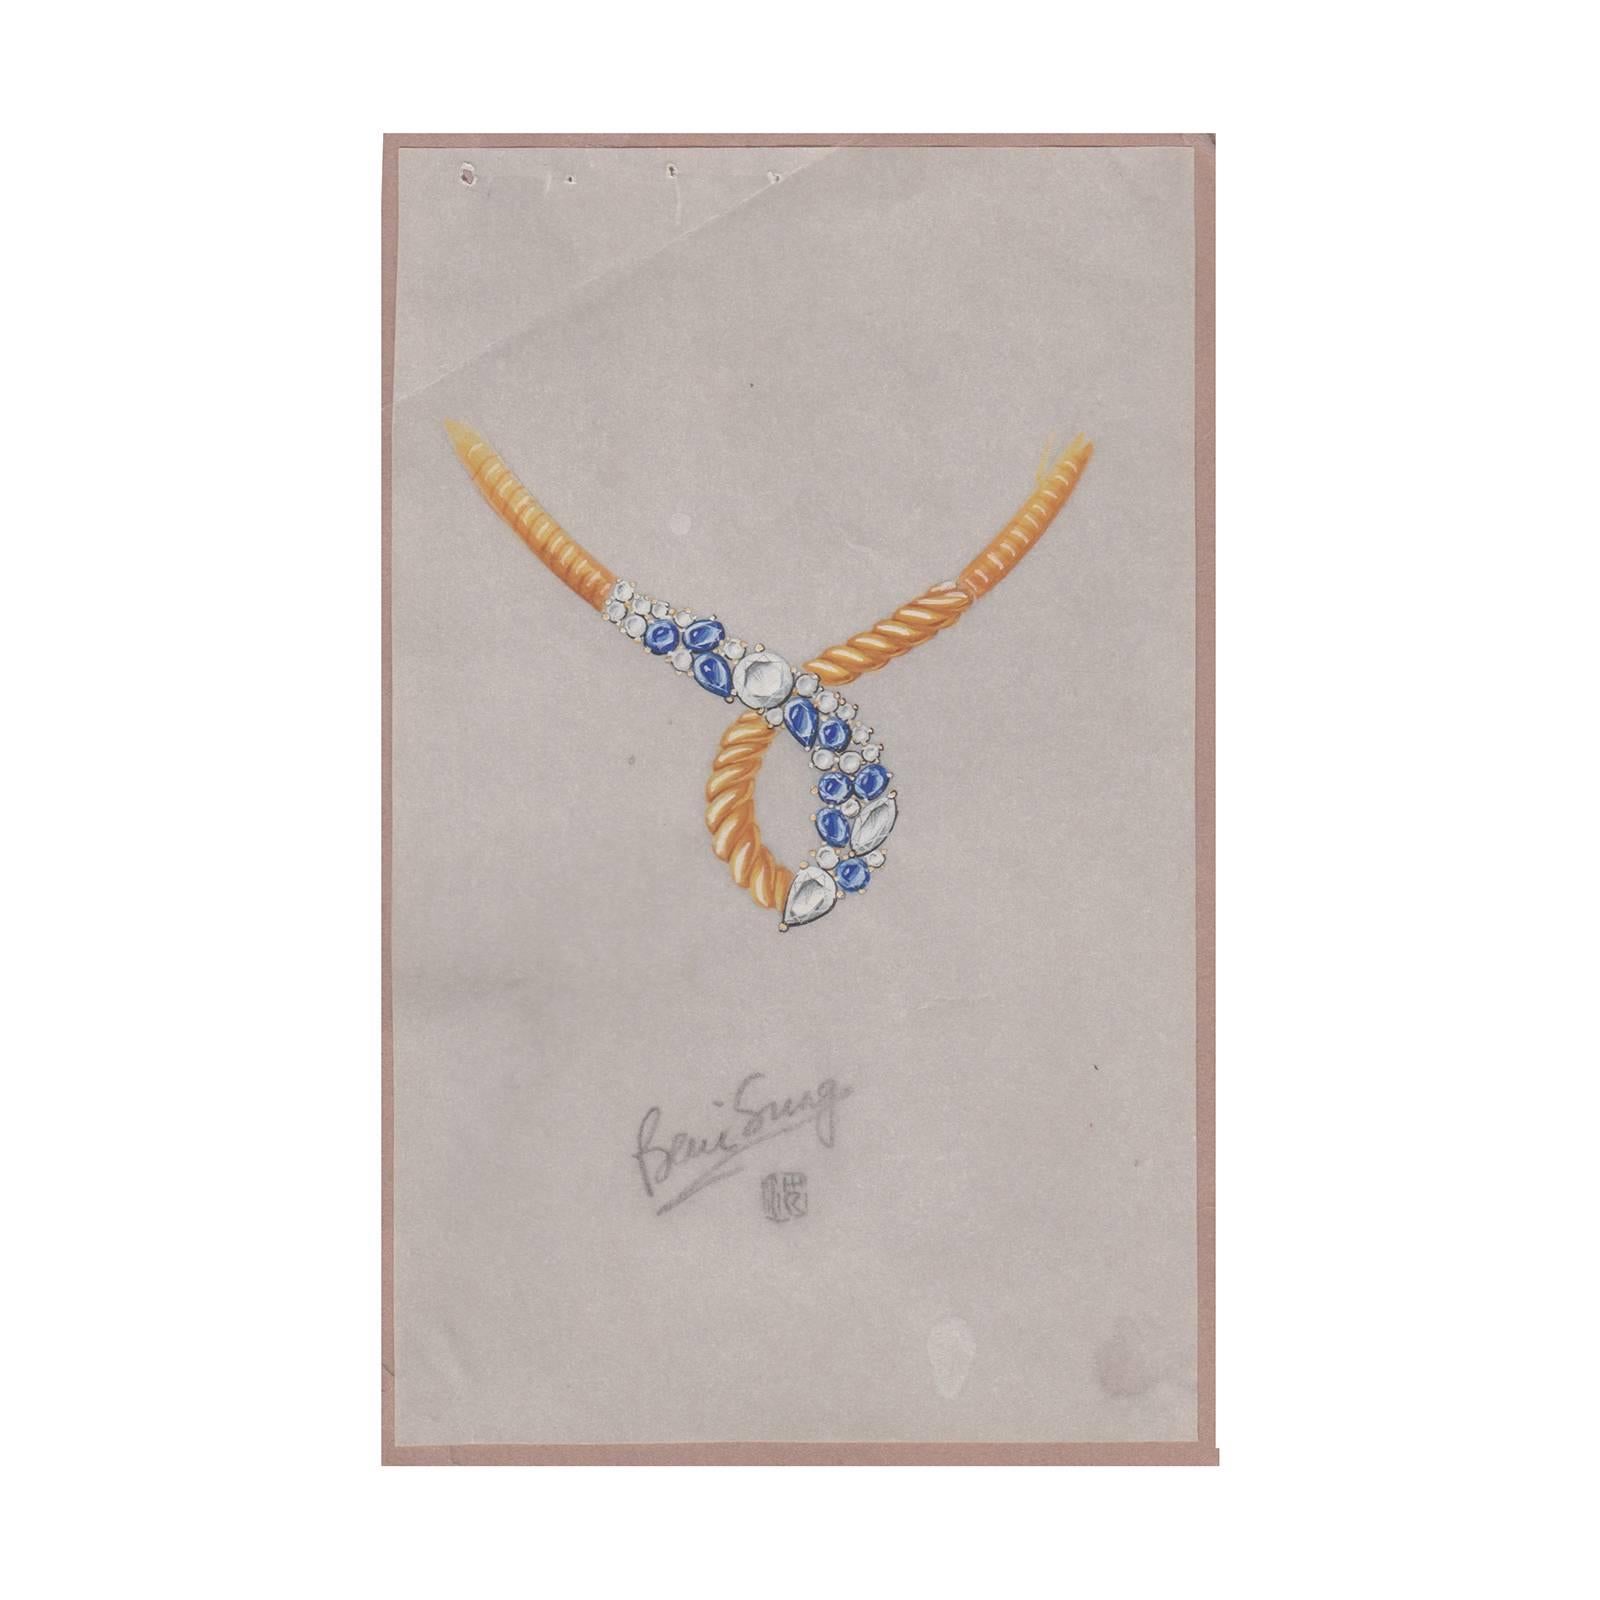 Beni Sung Aquamarine Diamond Sapphire Gold Necklace with Original Drawing For Sale 2